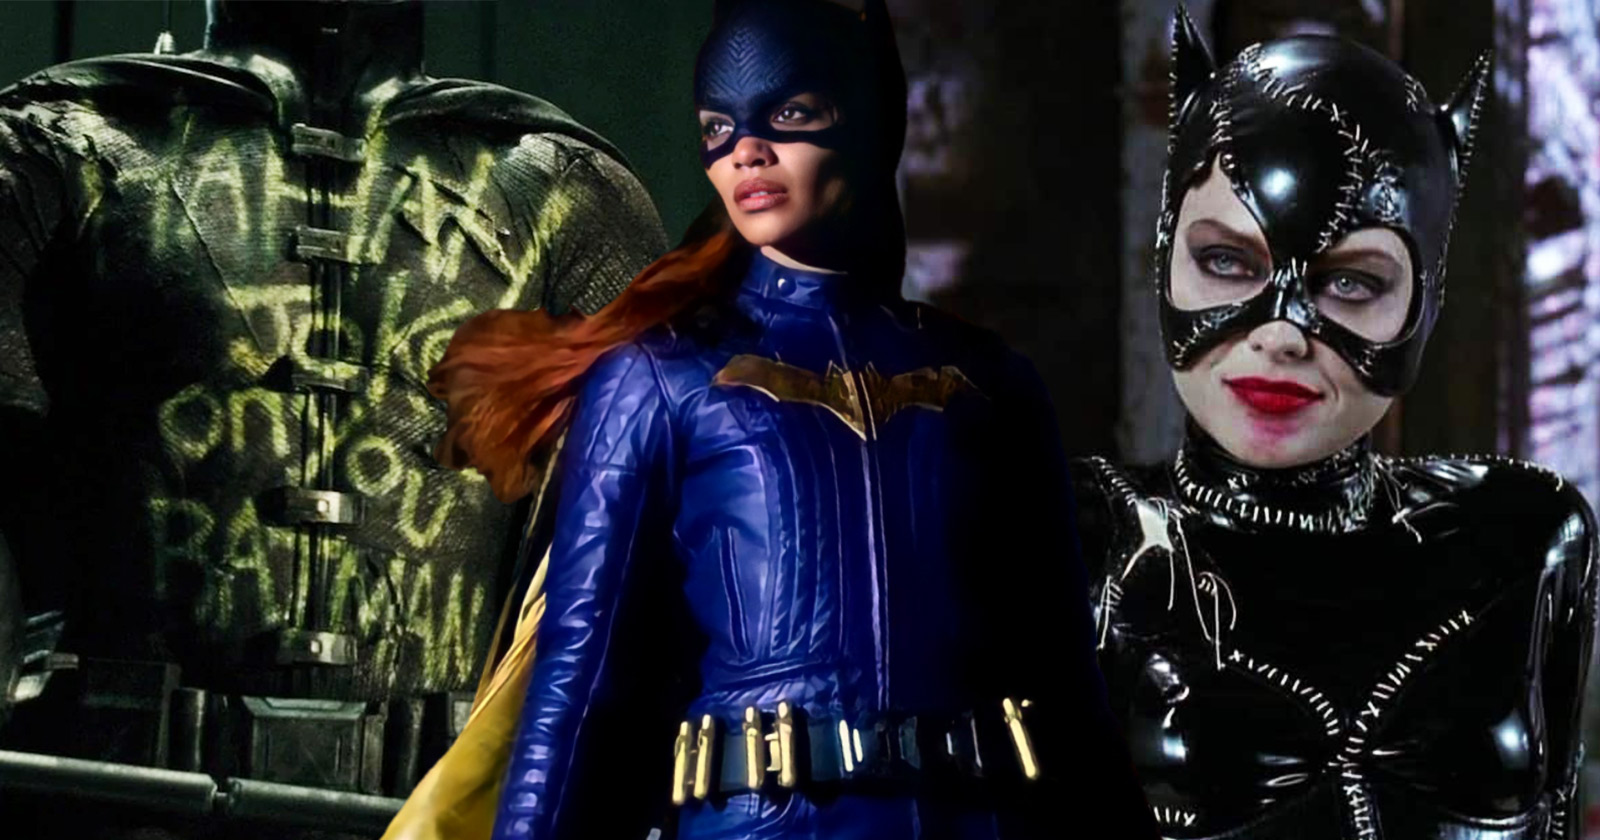 Details on Batgirl revealed, including references to Michelle Pfeiffer's  Catwoman and Jason Todd